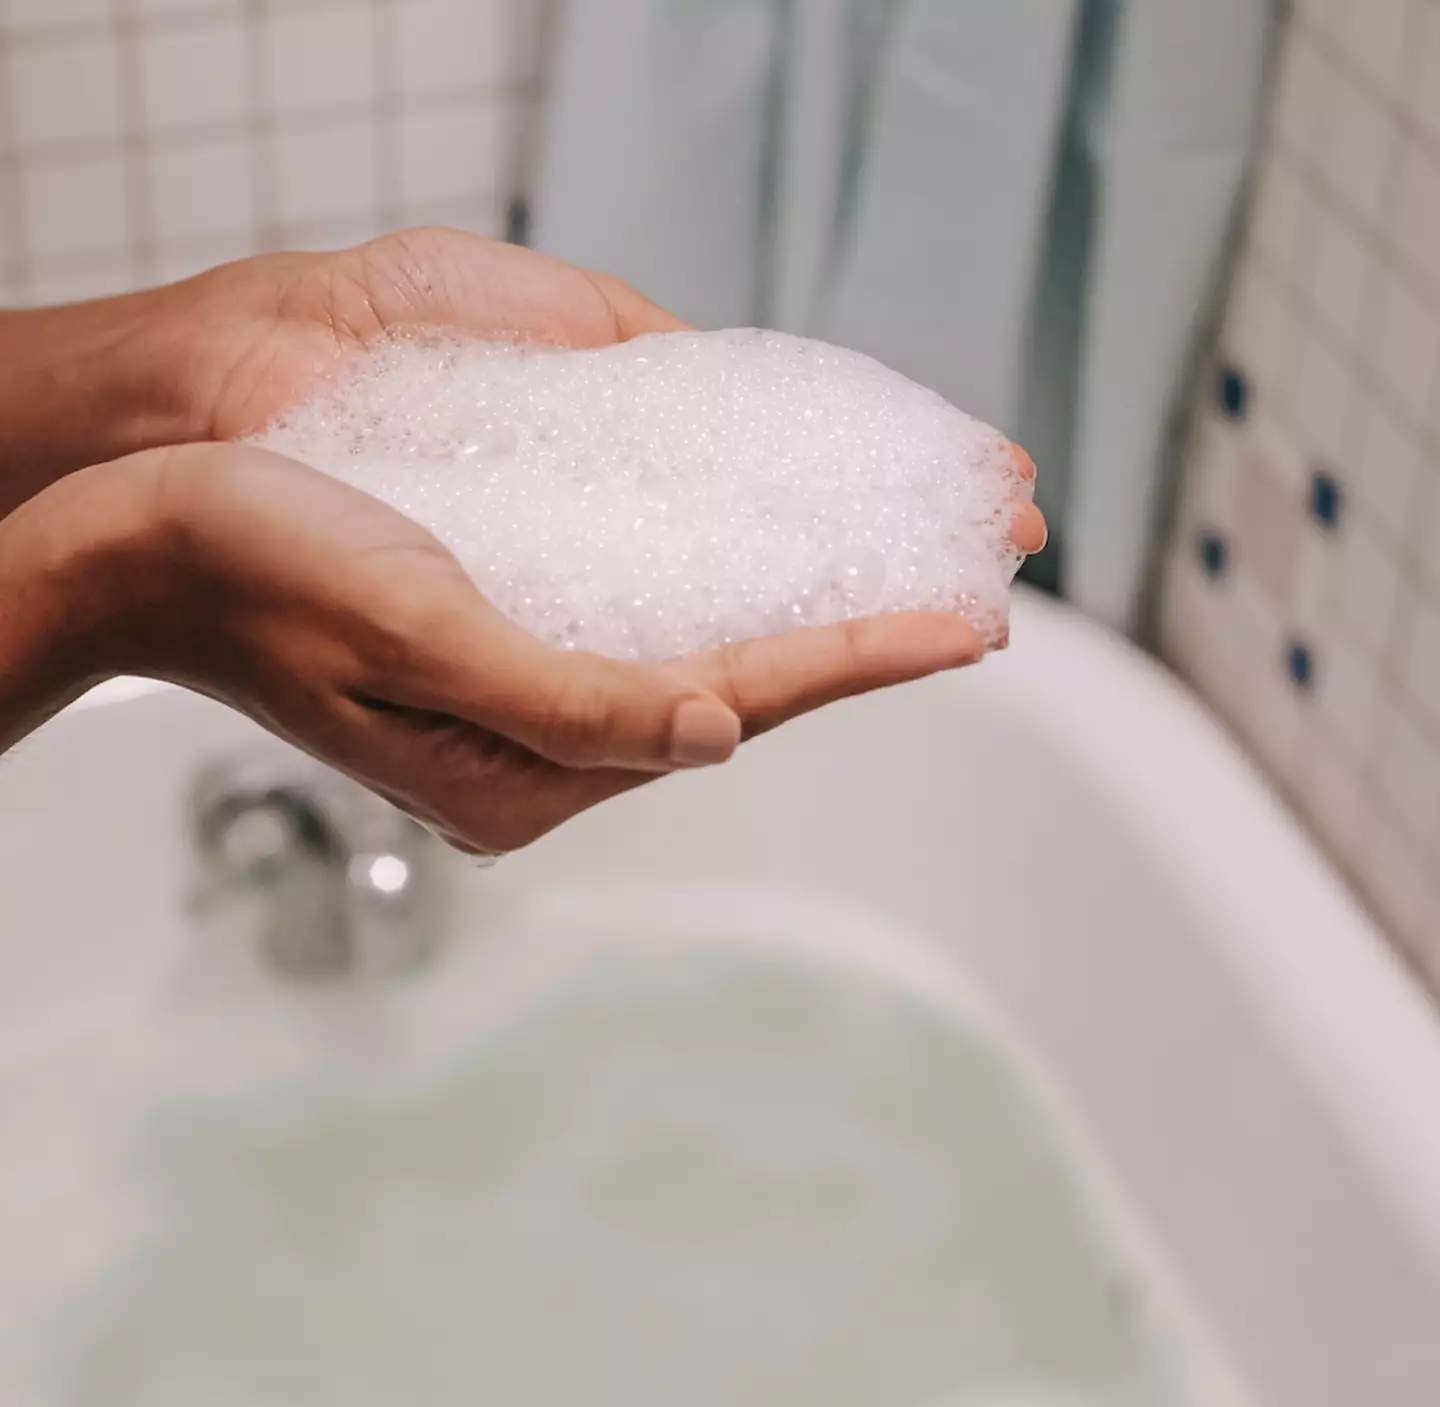 Experts have said showering and bathing too often can actually be harmful (